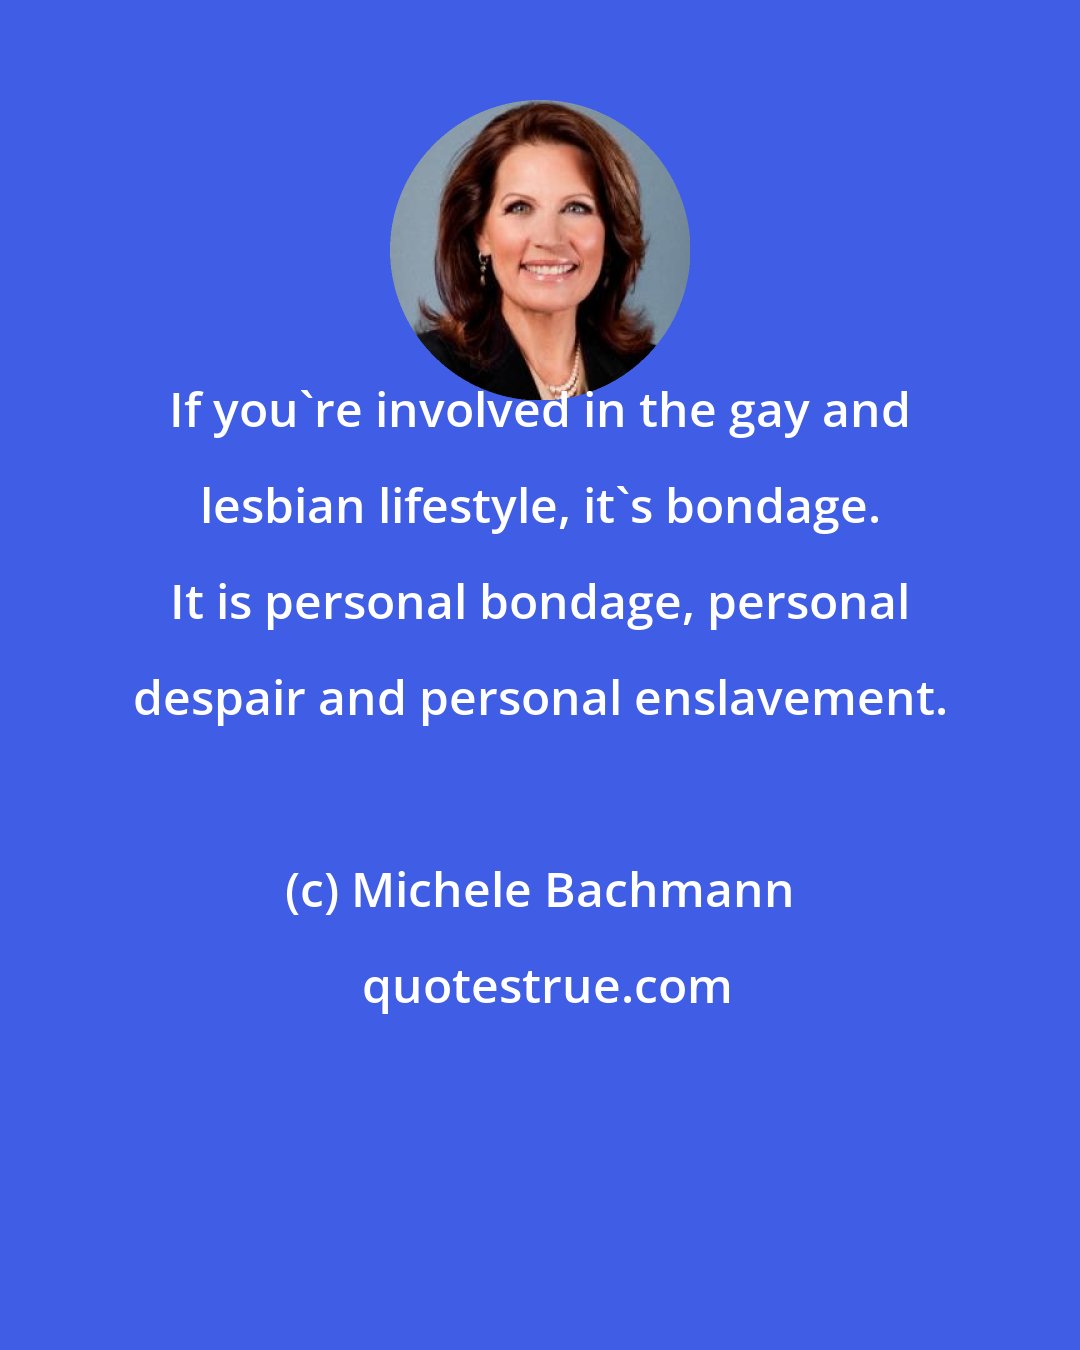 Michele Bachmann: If you're involved in the gay and lesbian lifestyle, it's bondage. It is personal bondage, personal despair and personal enslavement.